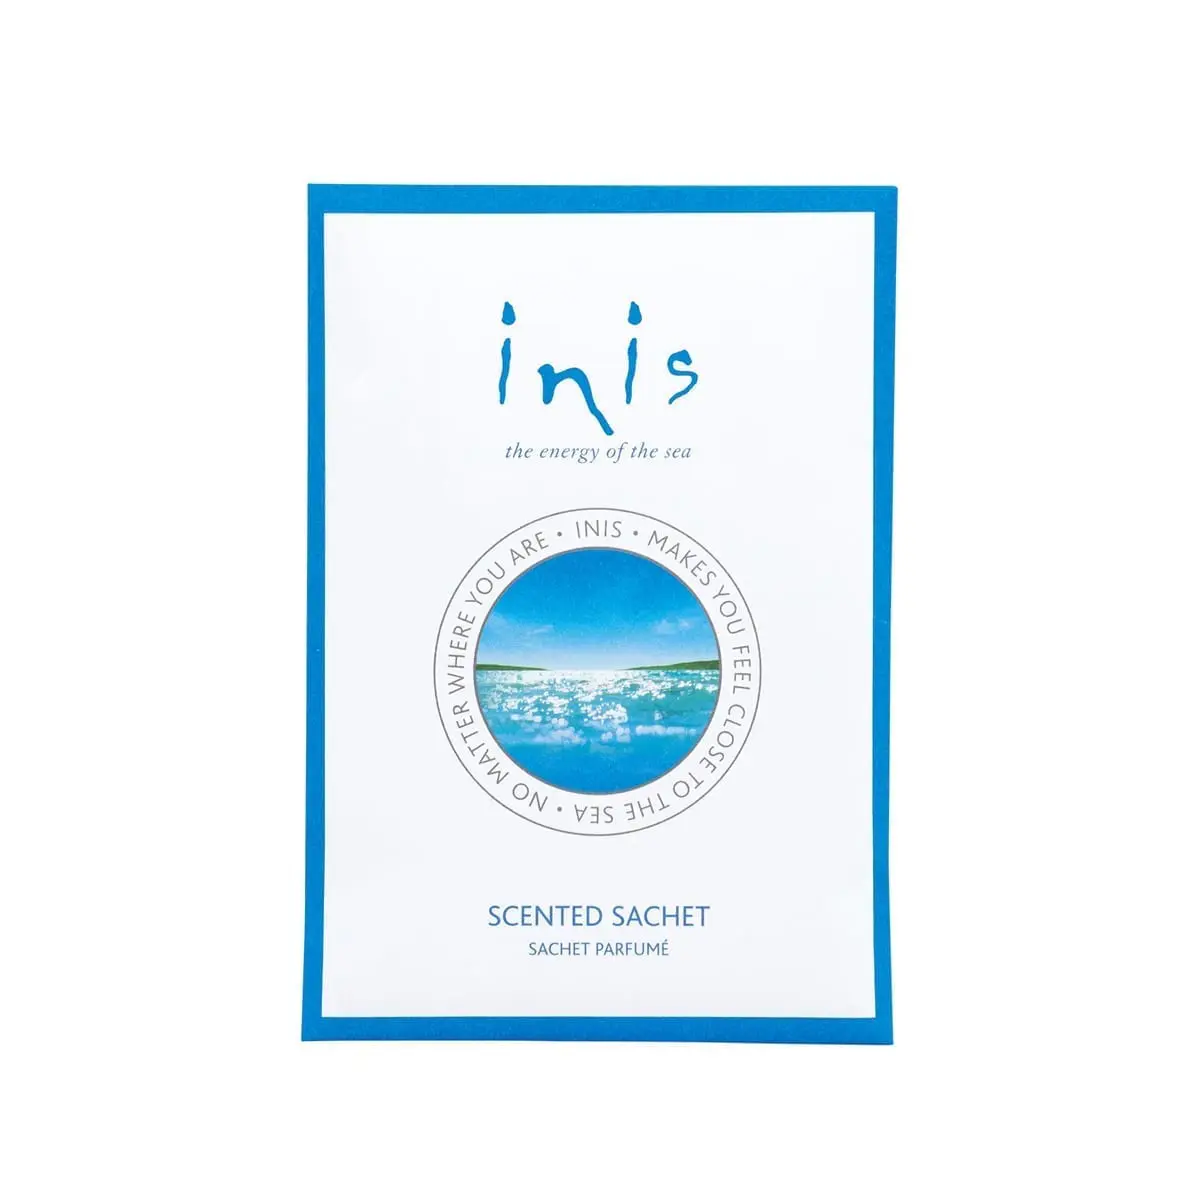 A blue and white picture of the front cover of inis.